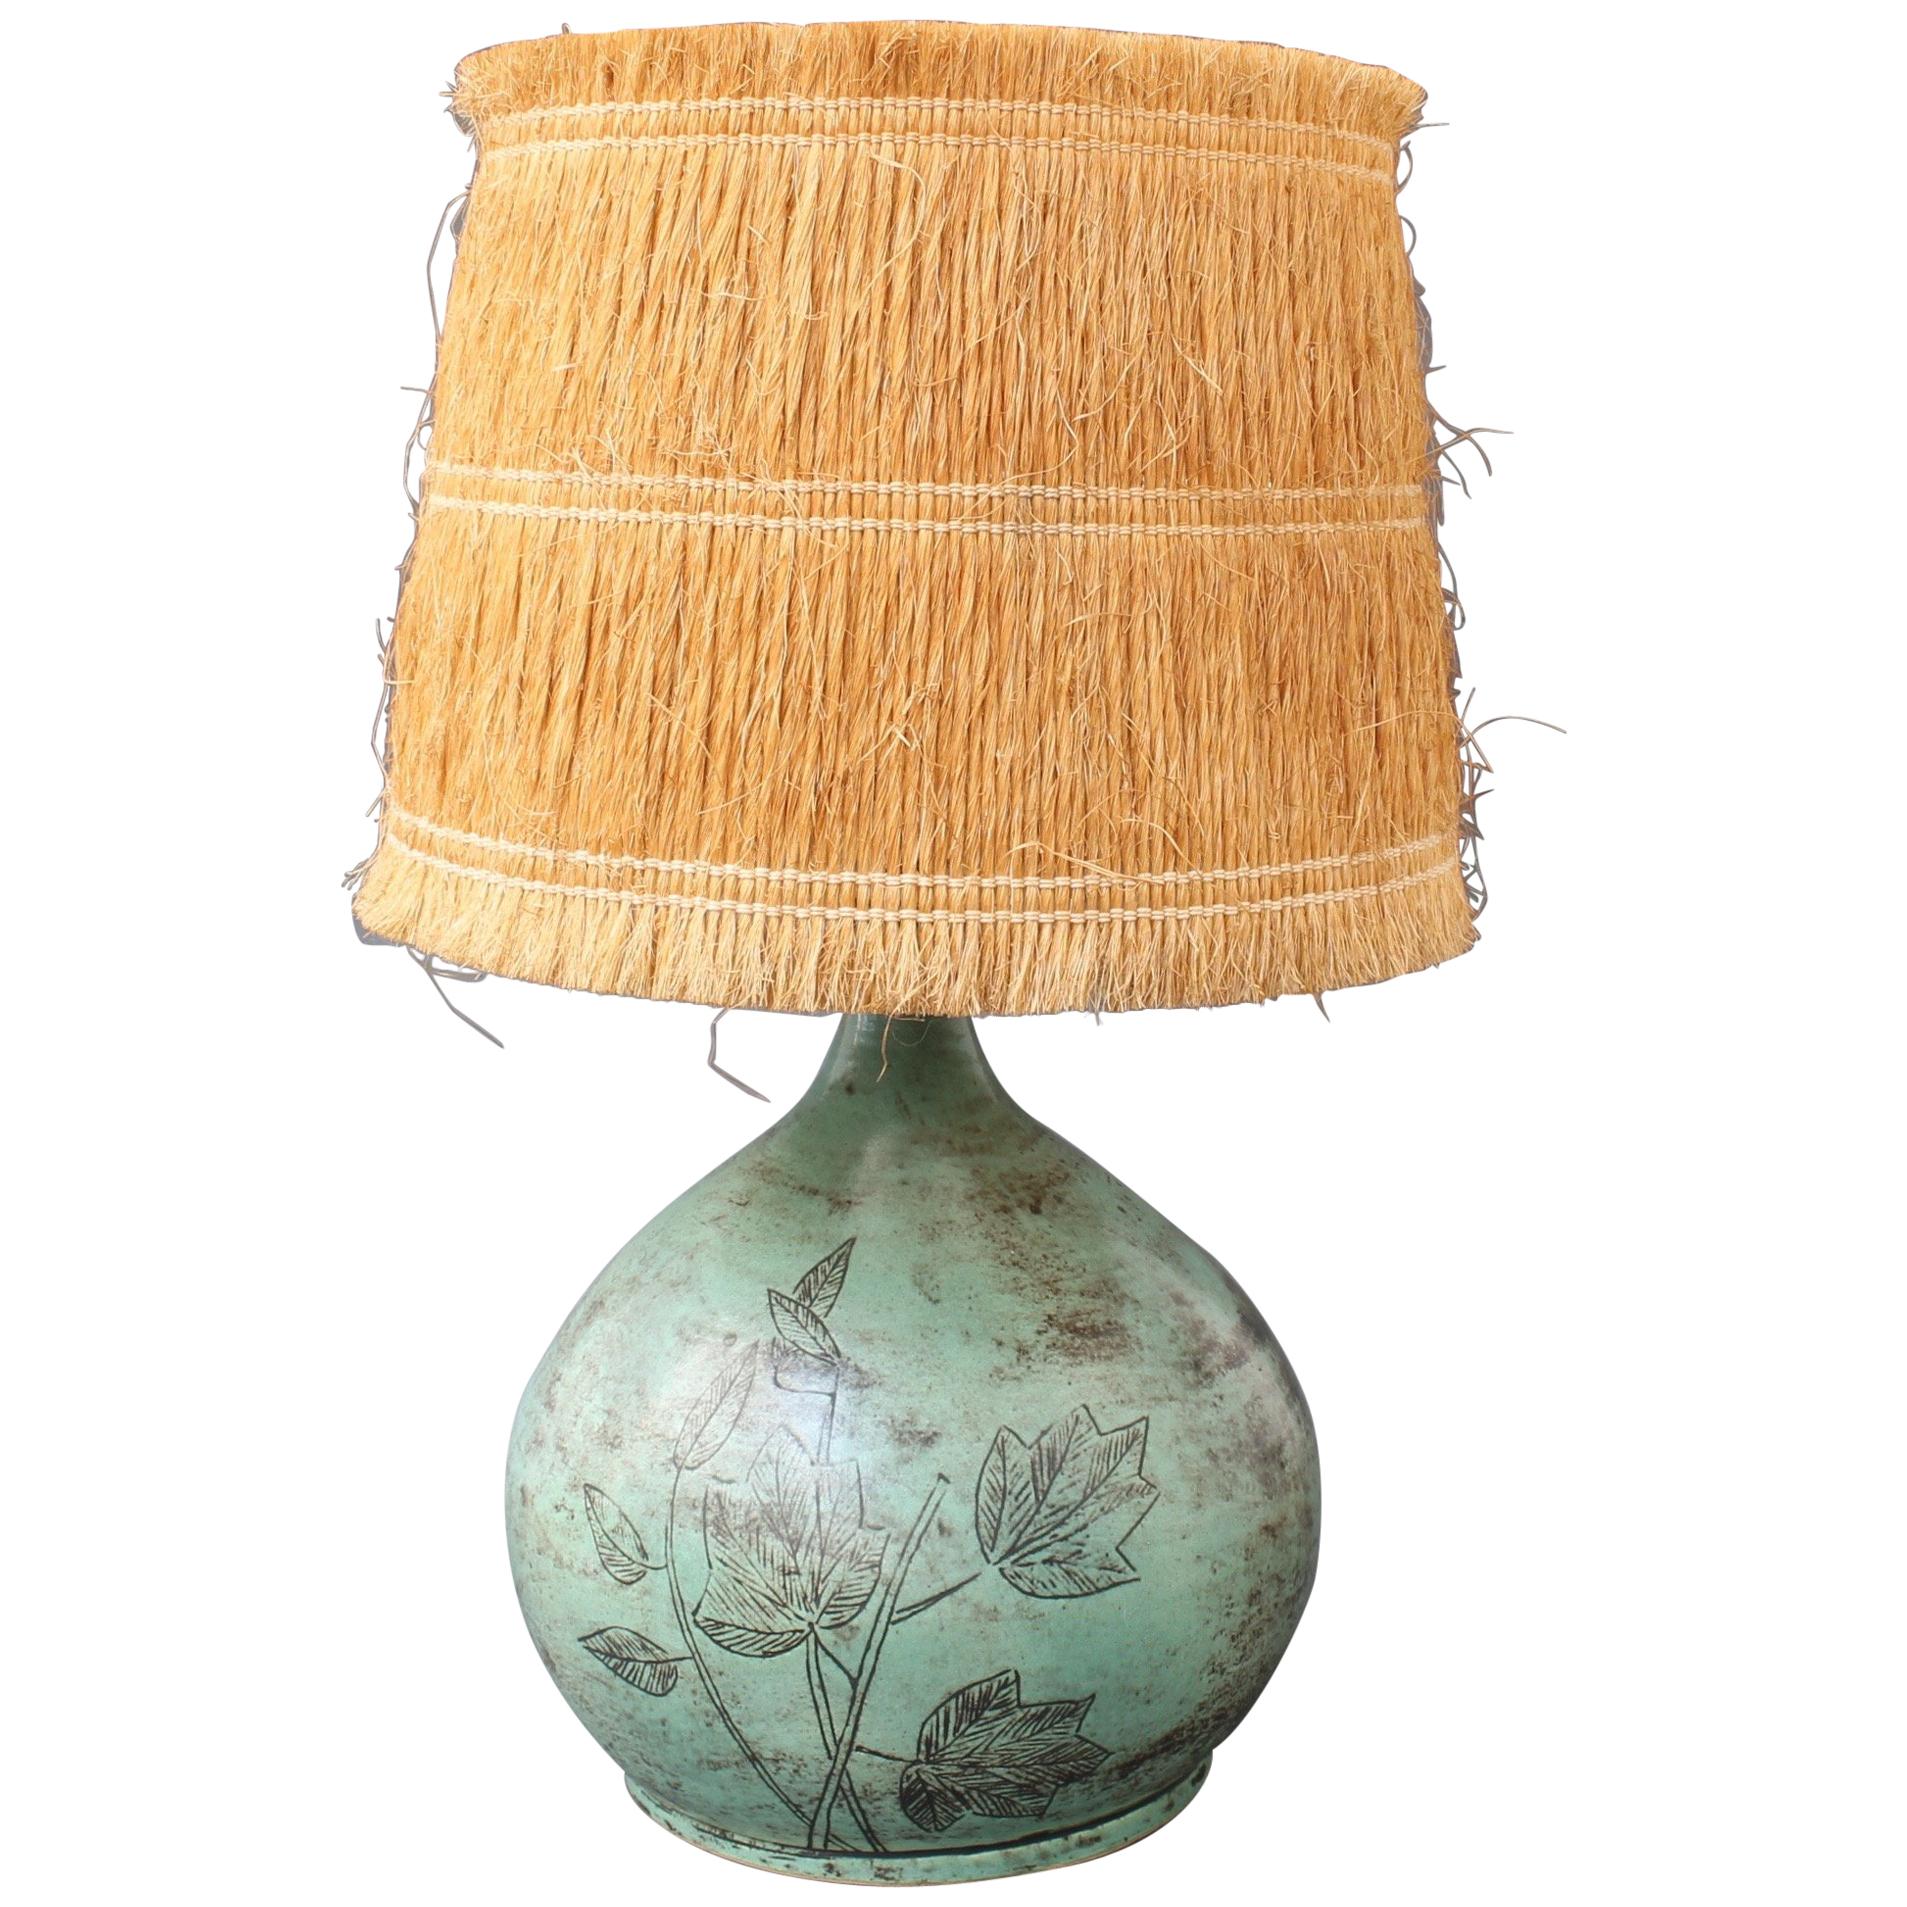 Ceramic Table Lamp by Jacques Blin with Raffia Lampshade, circa 1950s Green